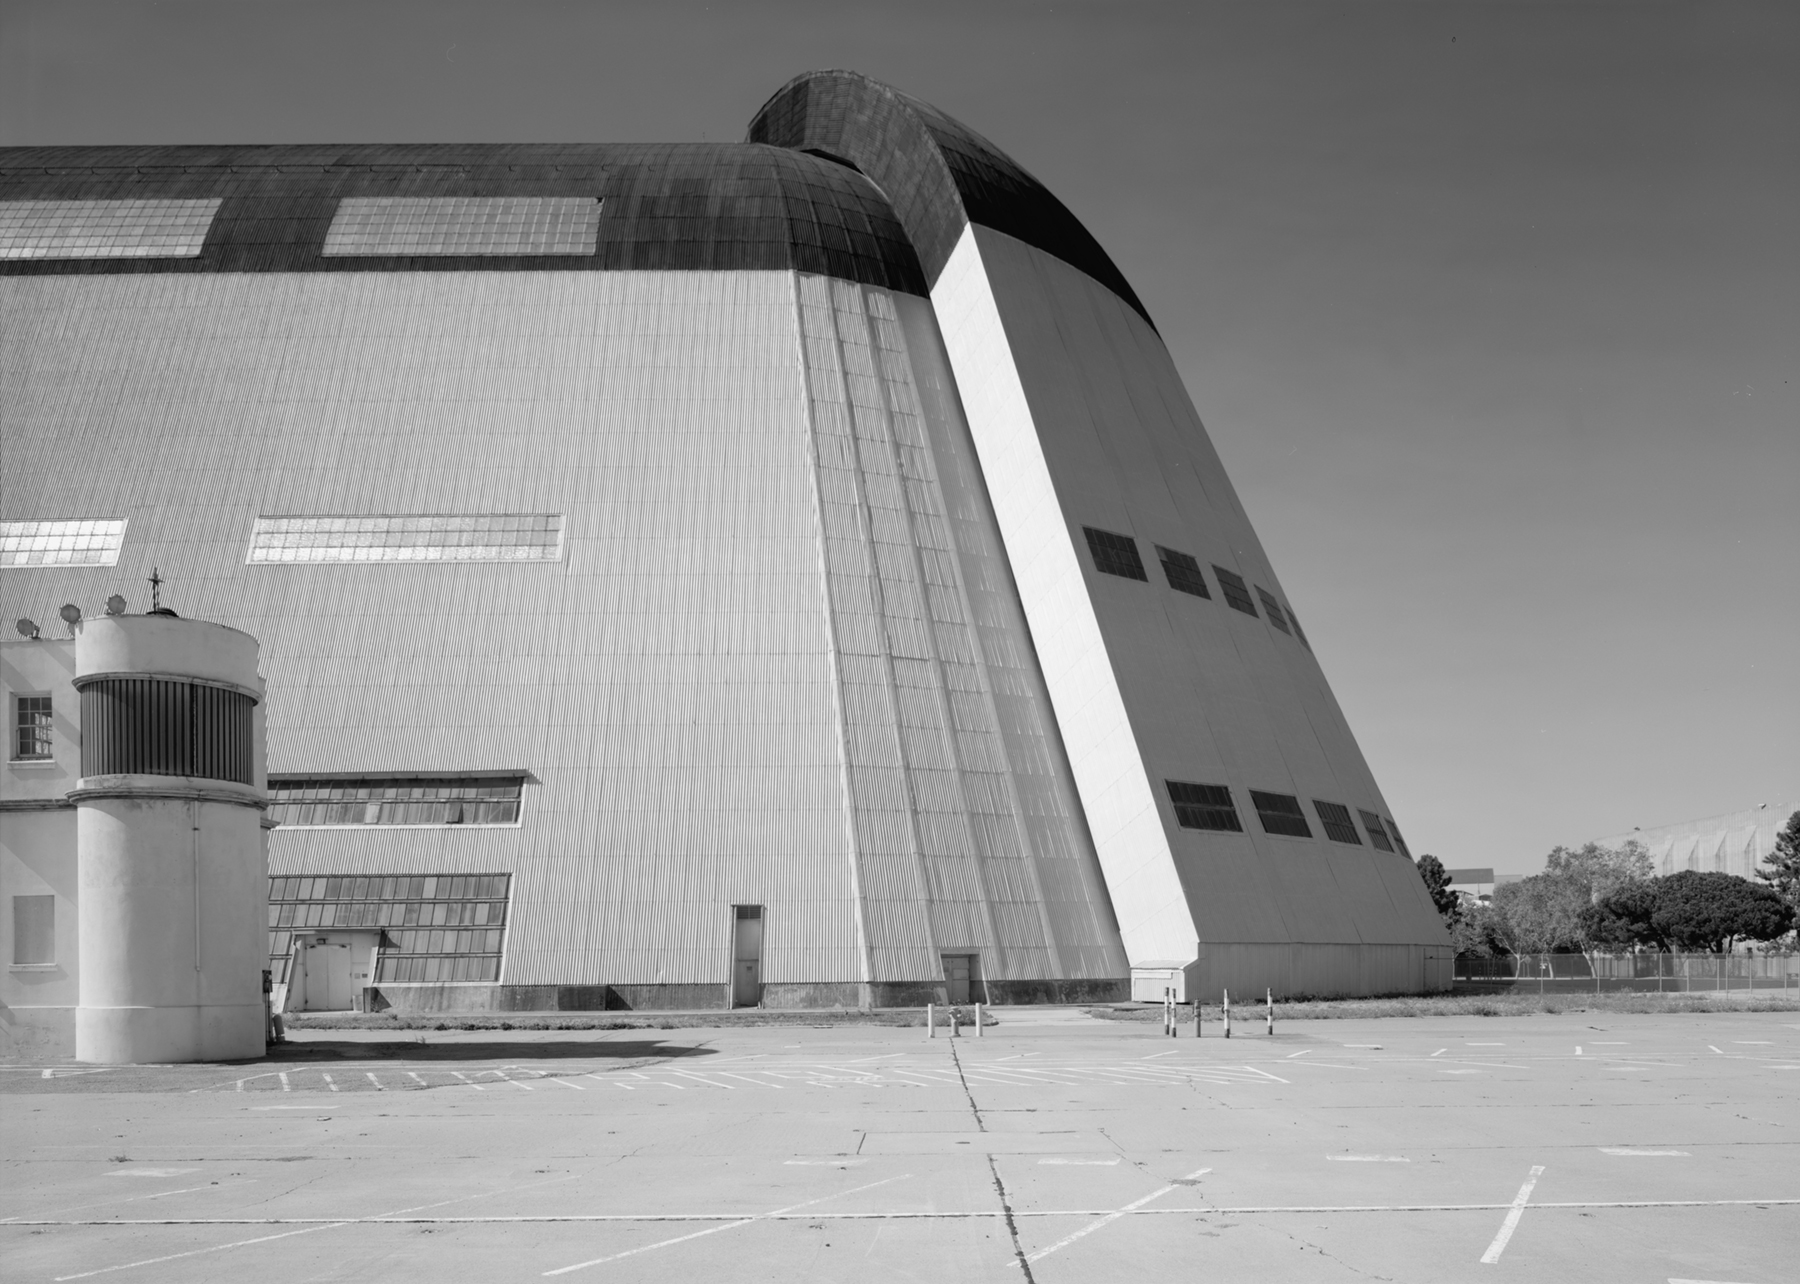 An exterior view of Hangar 1 showing a portion of its long, metal facade and the tall, curved doors located at the end of the huge white building.